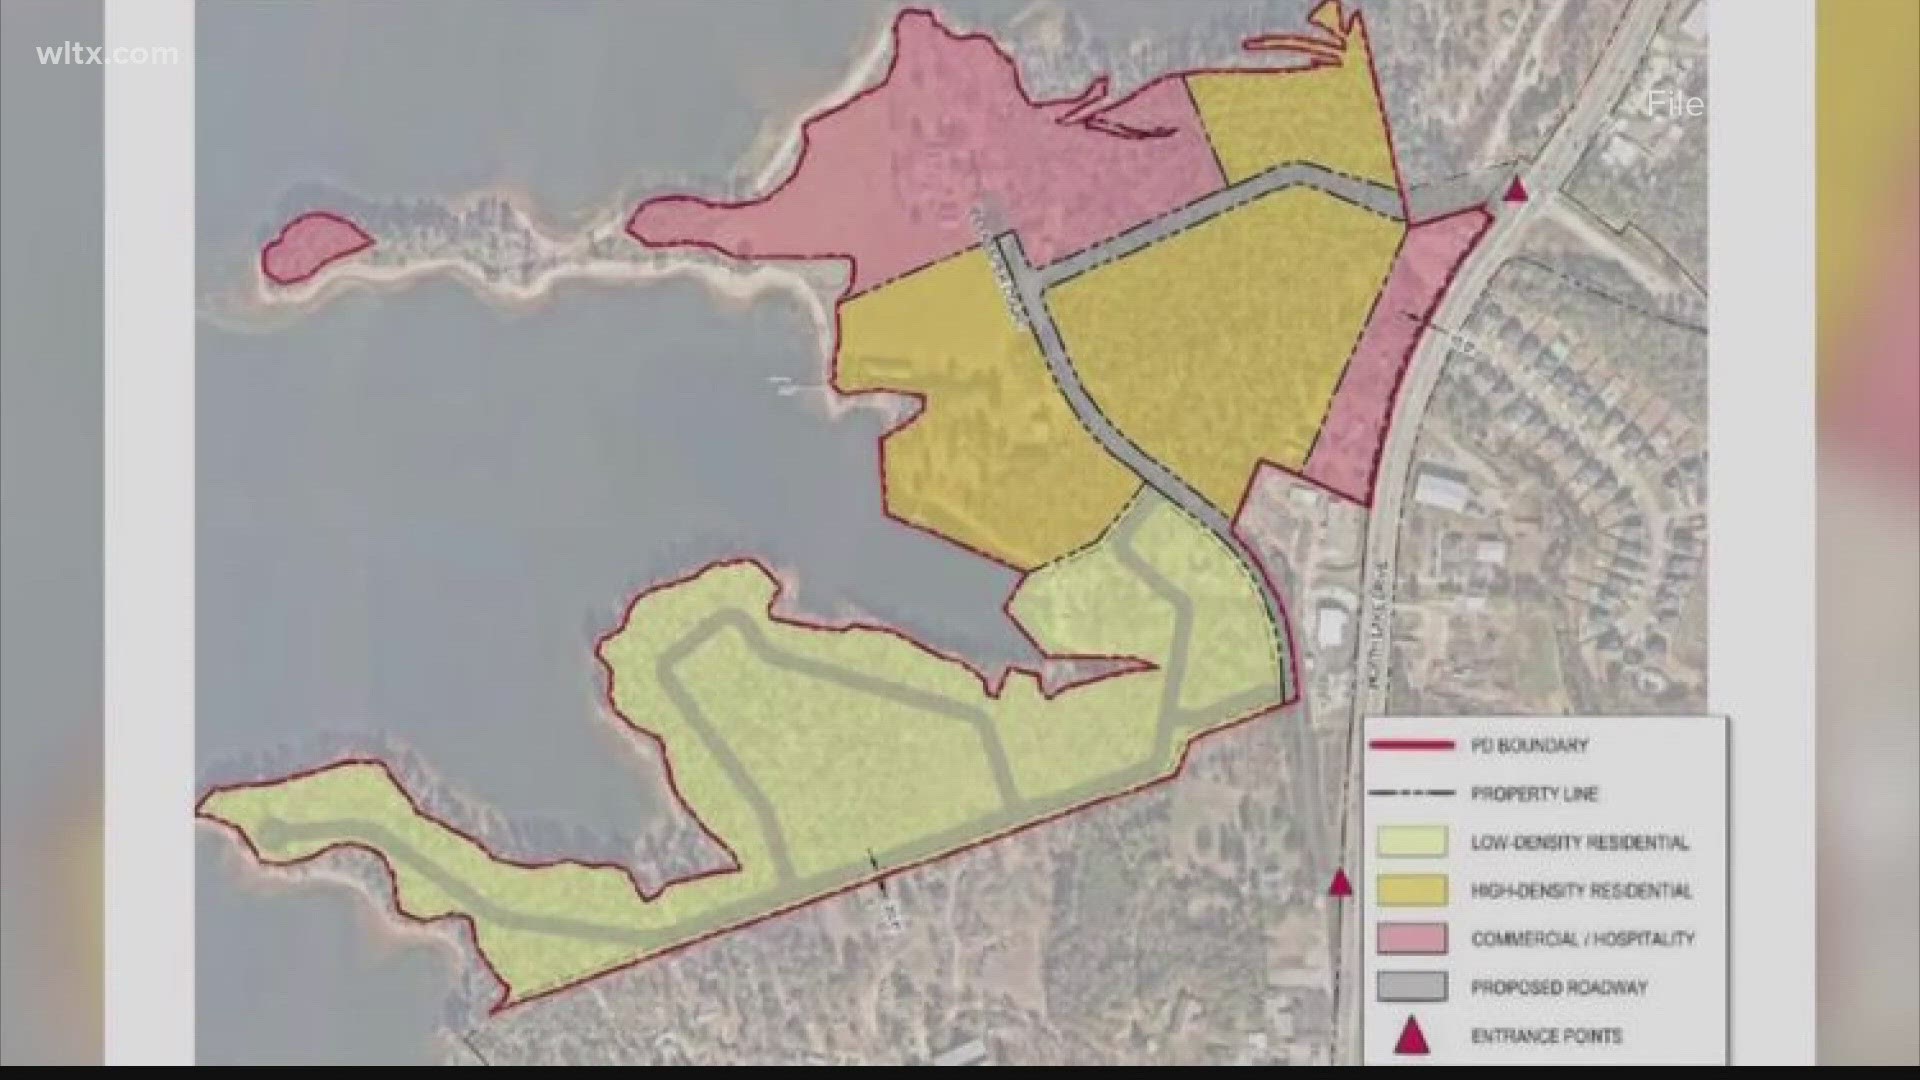 Developers have withdrawn plans to bring a massive new development to Lake Murray, a project that had gotten pushback from some residents and local lawmakers.